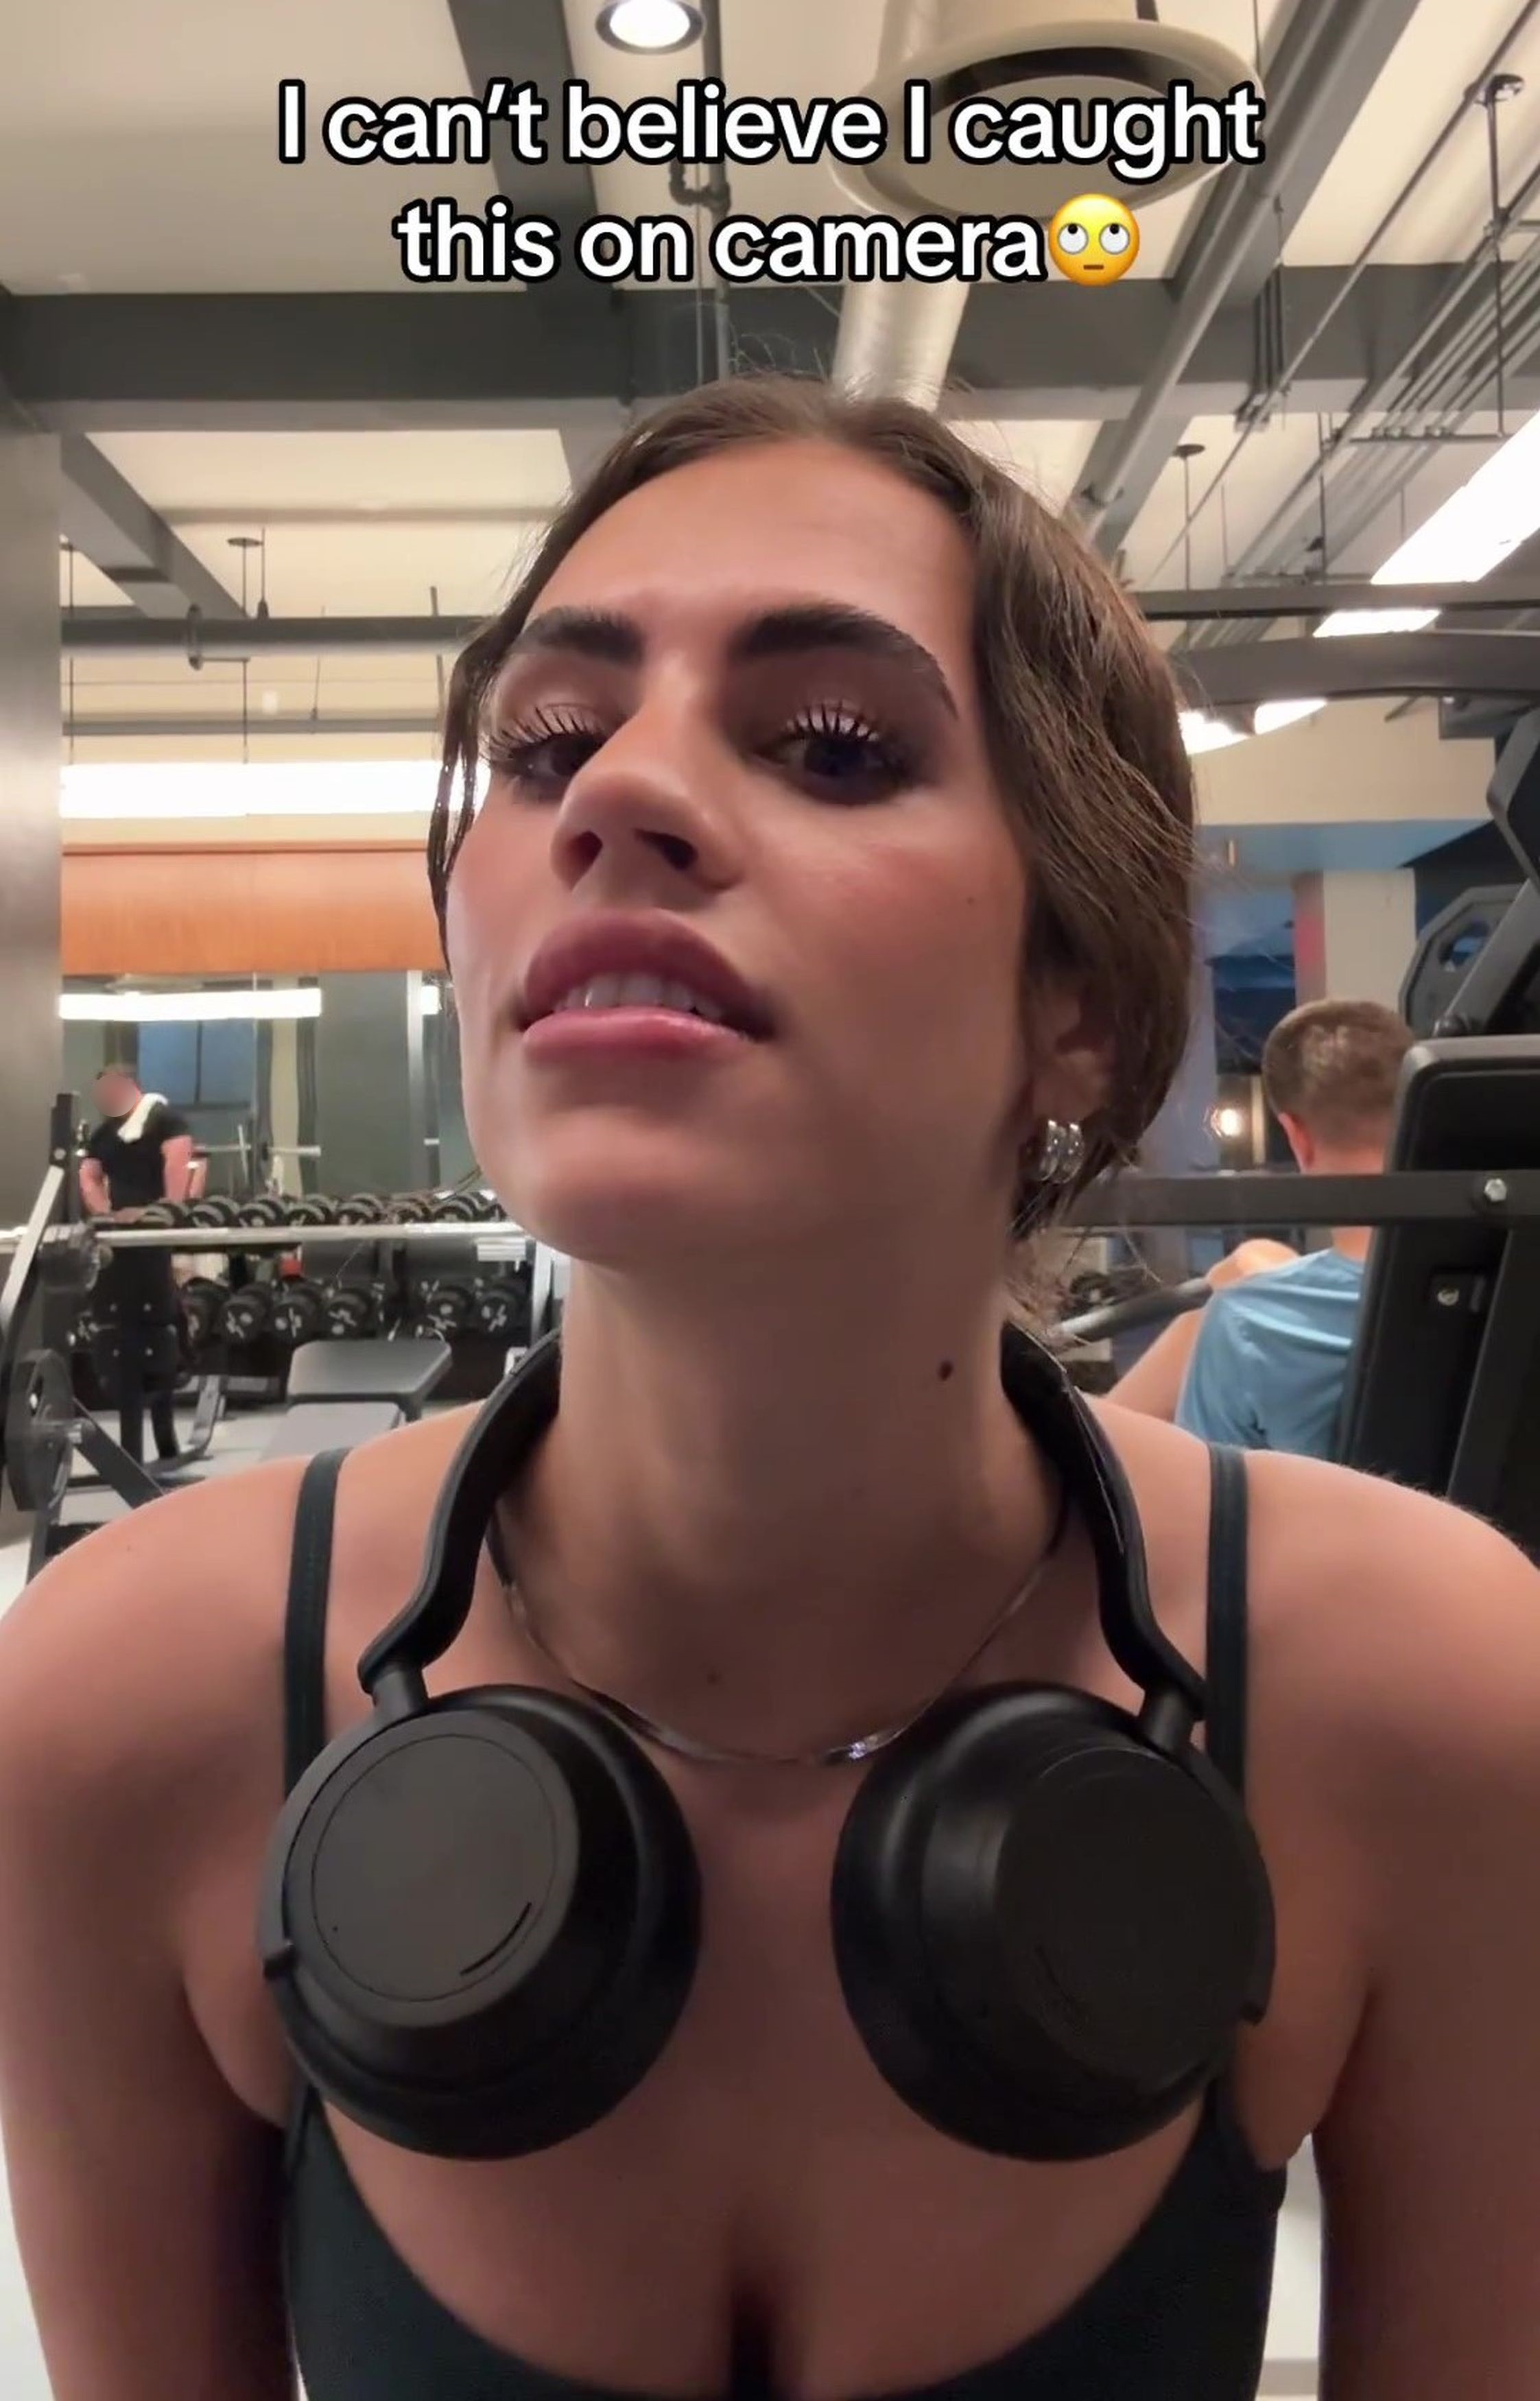 The gym babe had the ultimate revenge after she hit back in the best possible way